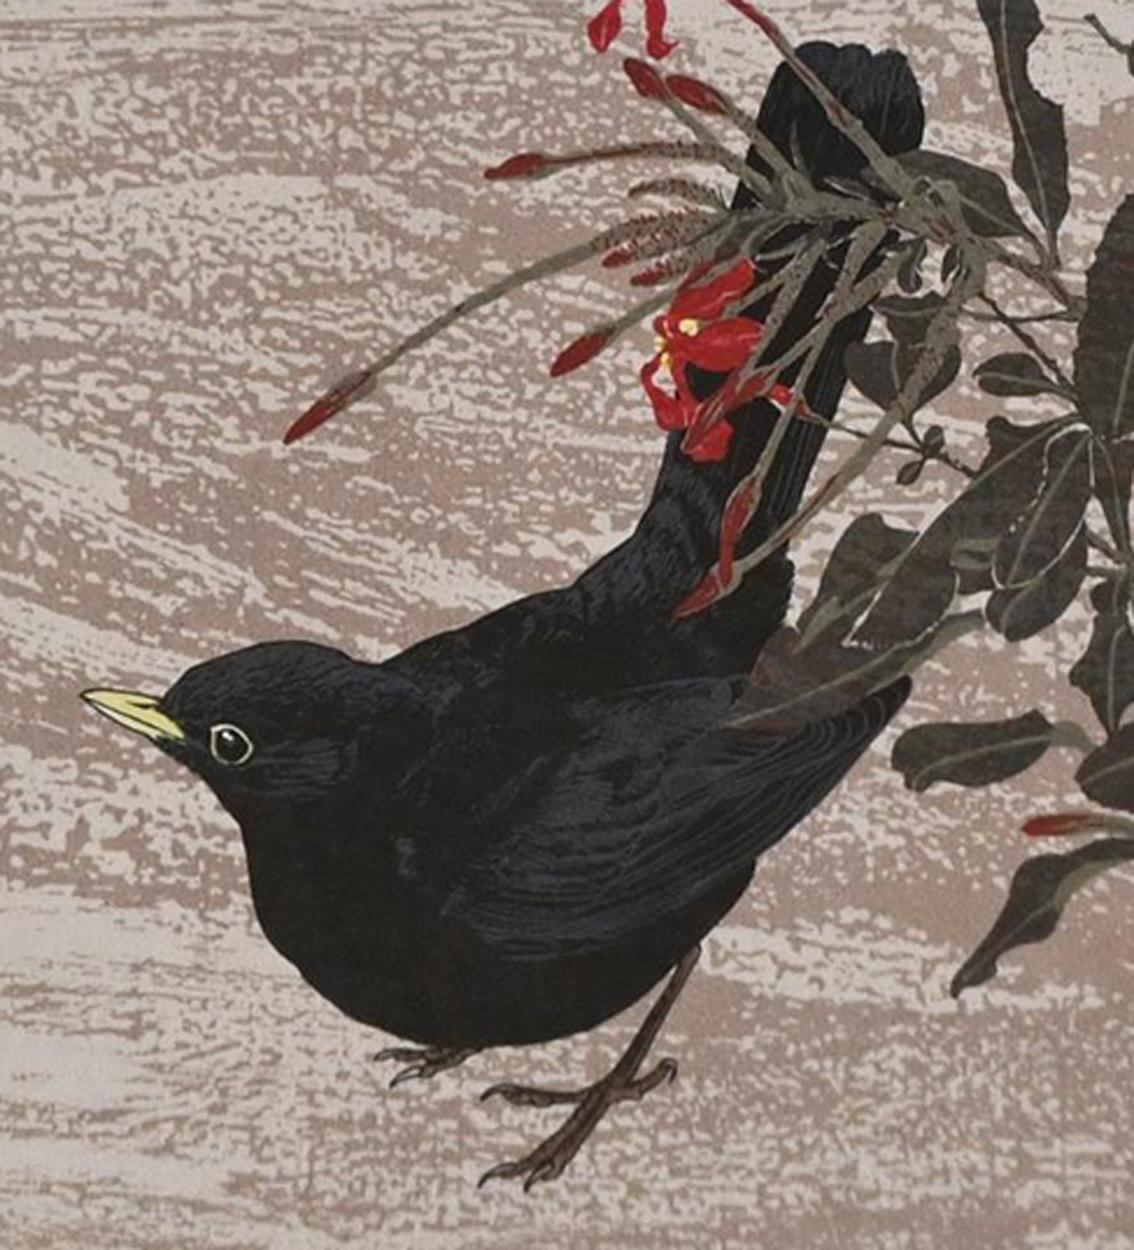 James Williamson-Bell (1938-2010), Blackbird, Dated 1980, Woodcut Limited Edition 18/50.

James Williamson Bell was a native of Wallsend, Newcastle and began his working life in the Tyneside ship-building industry. Working as a draughtsman at Swan